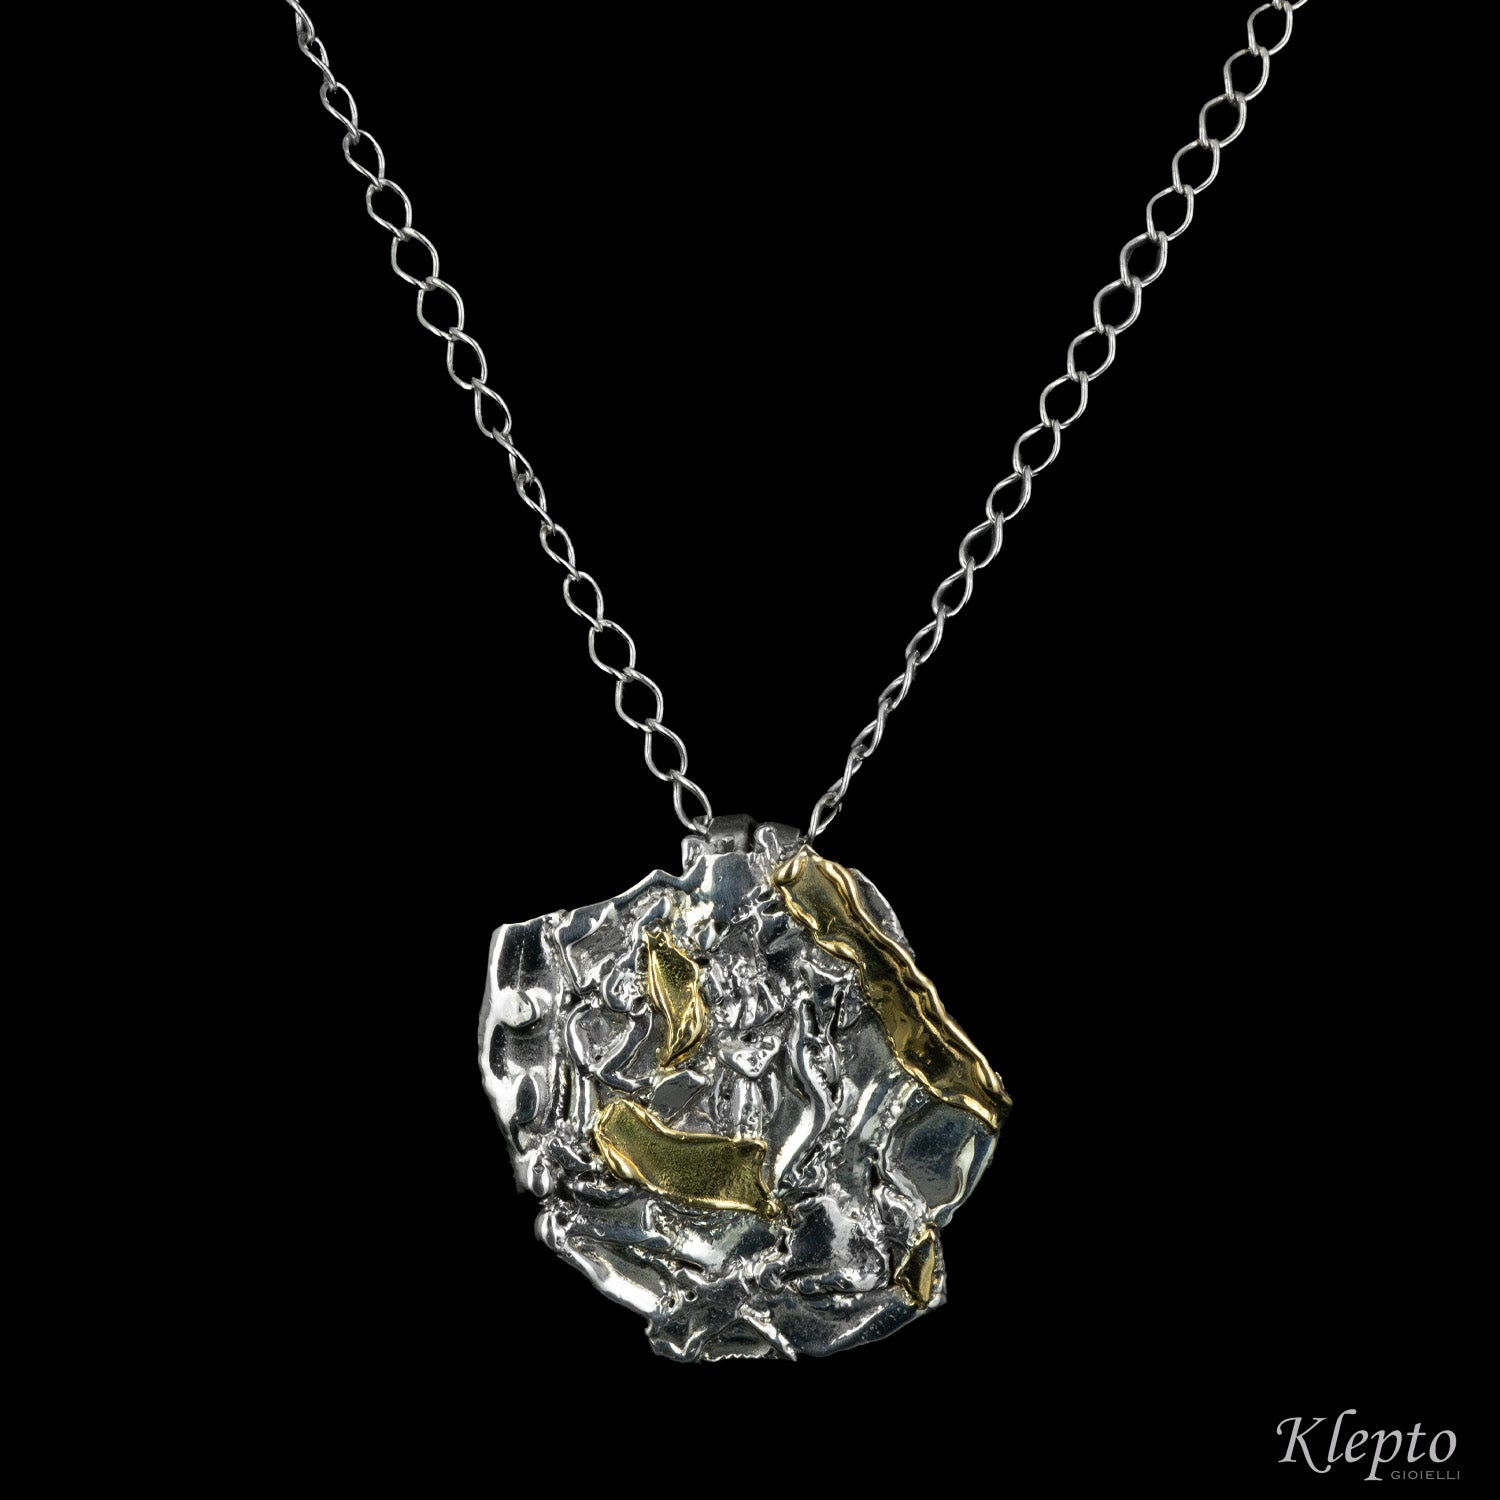 Pendant in Silnova® Silver and yellow gold